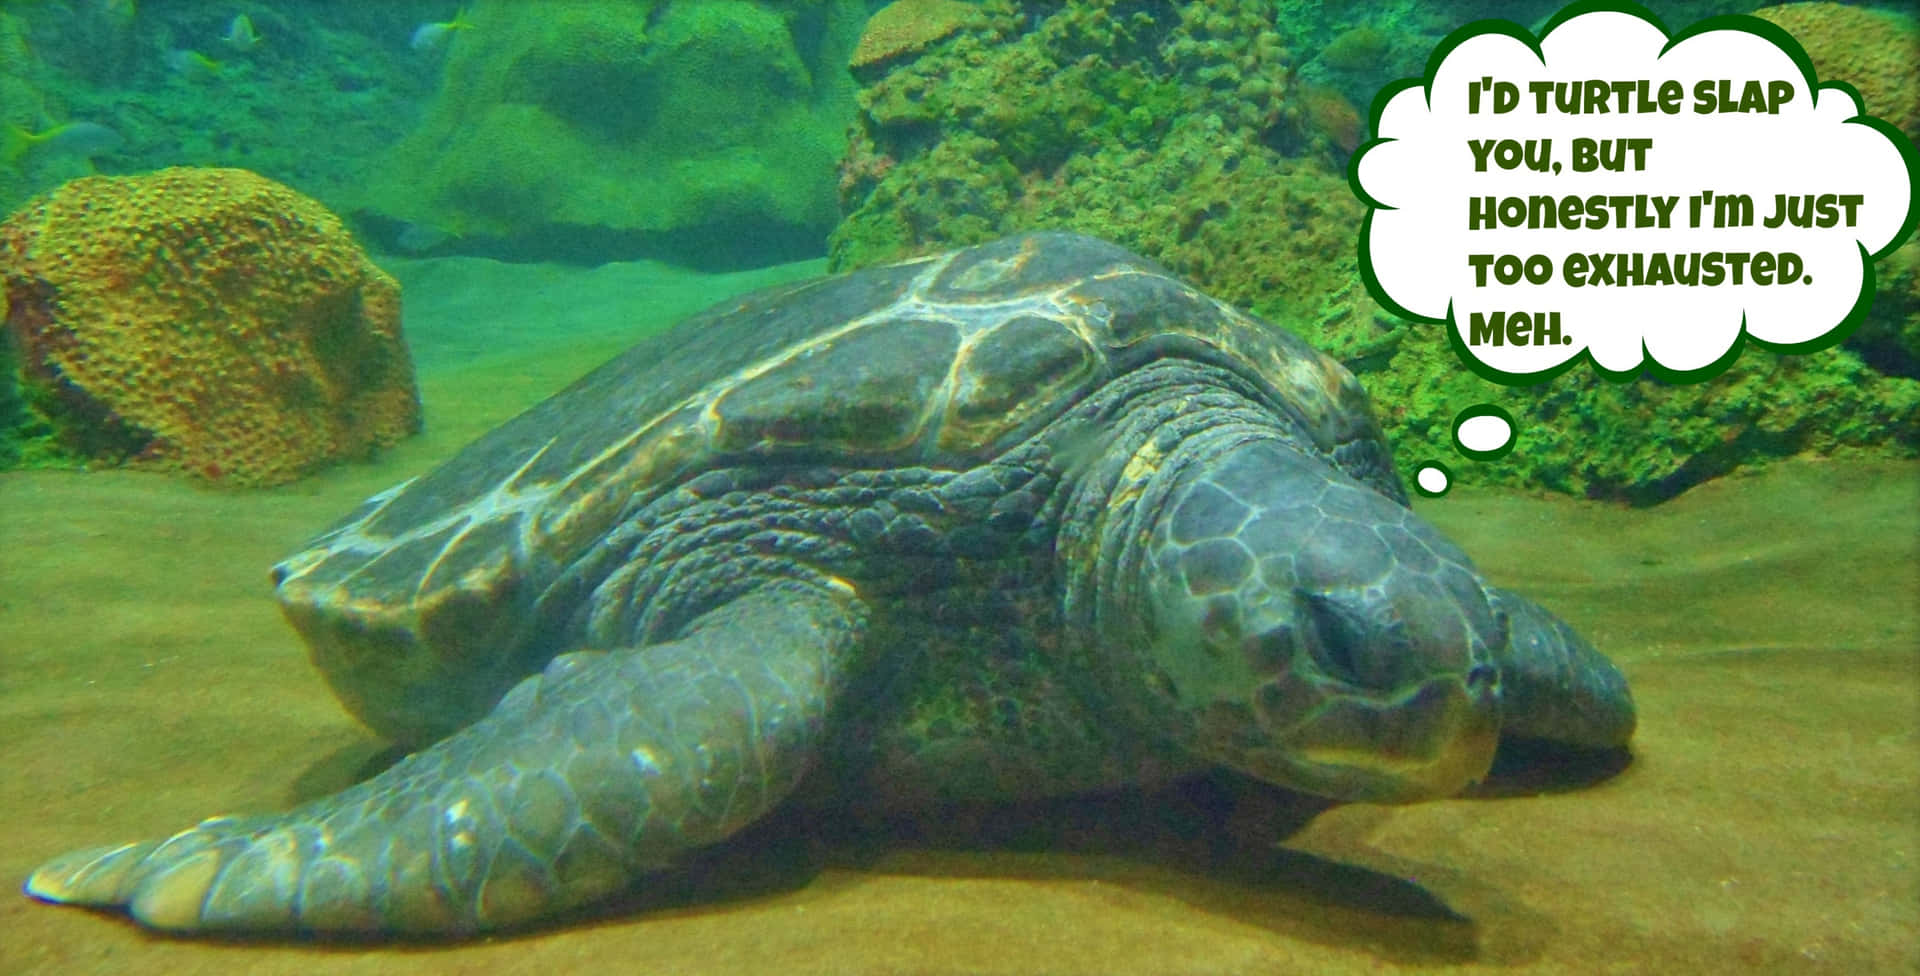 This Funny Turtle has a Many Reasons to Smile